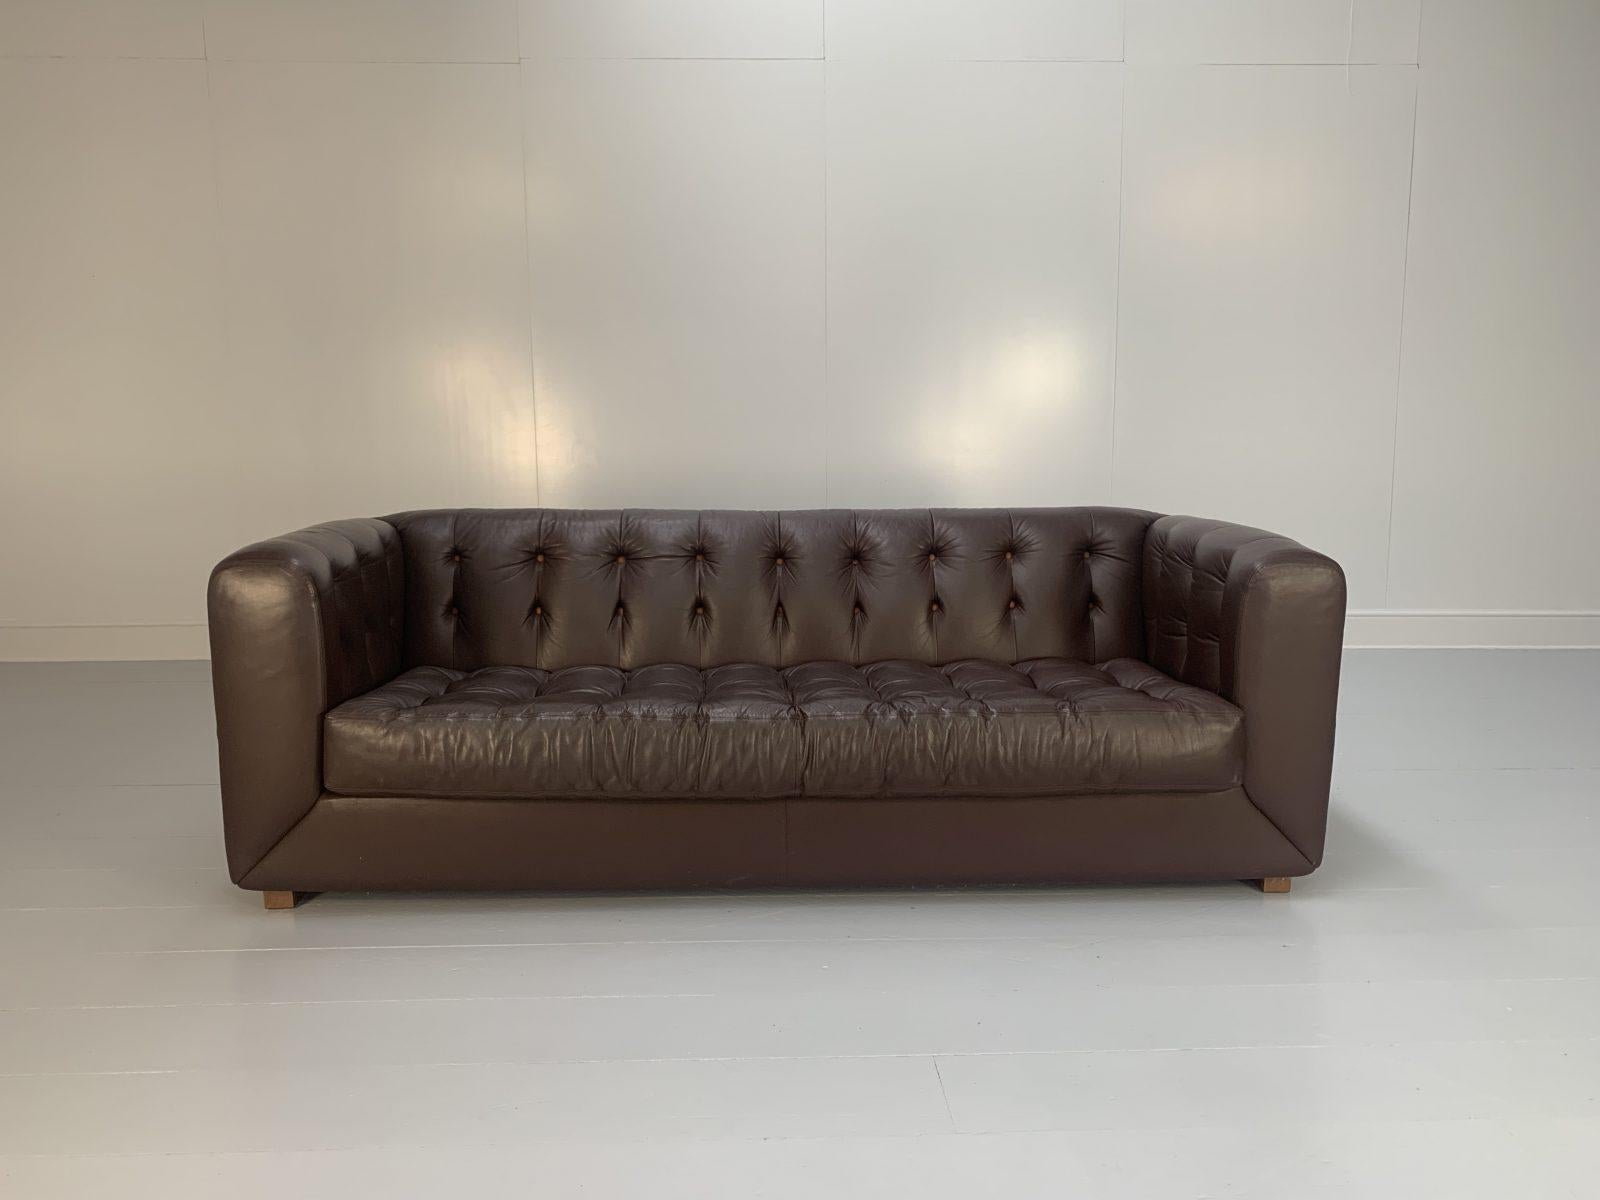 Contemporary David Linley “Yoxford” Chesterfield 3-Seat Sofa in Brown Leather For Sale